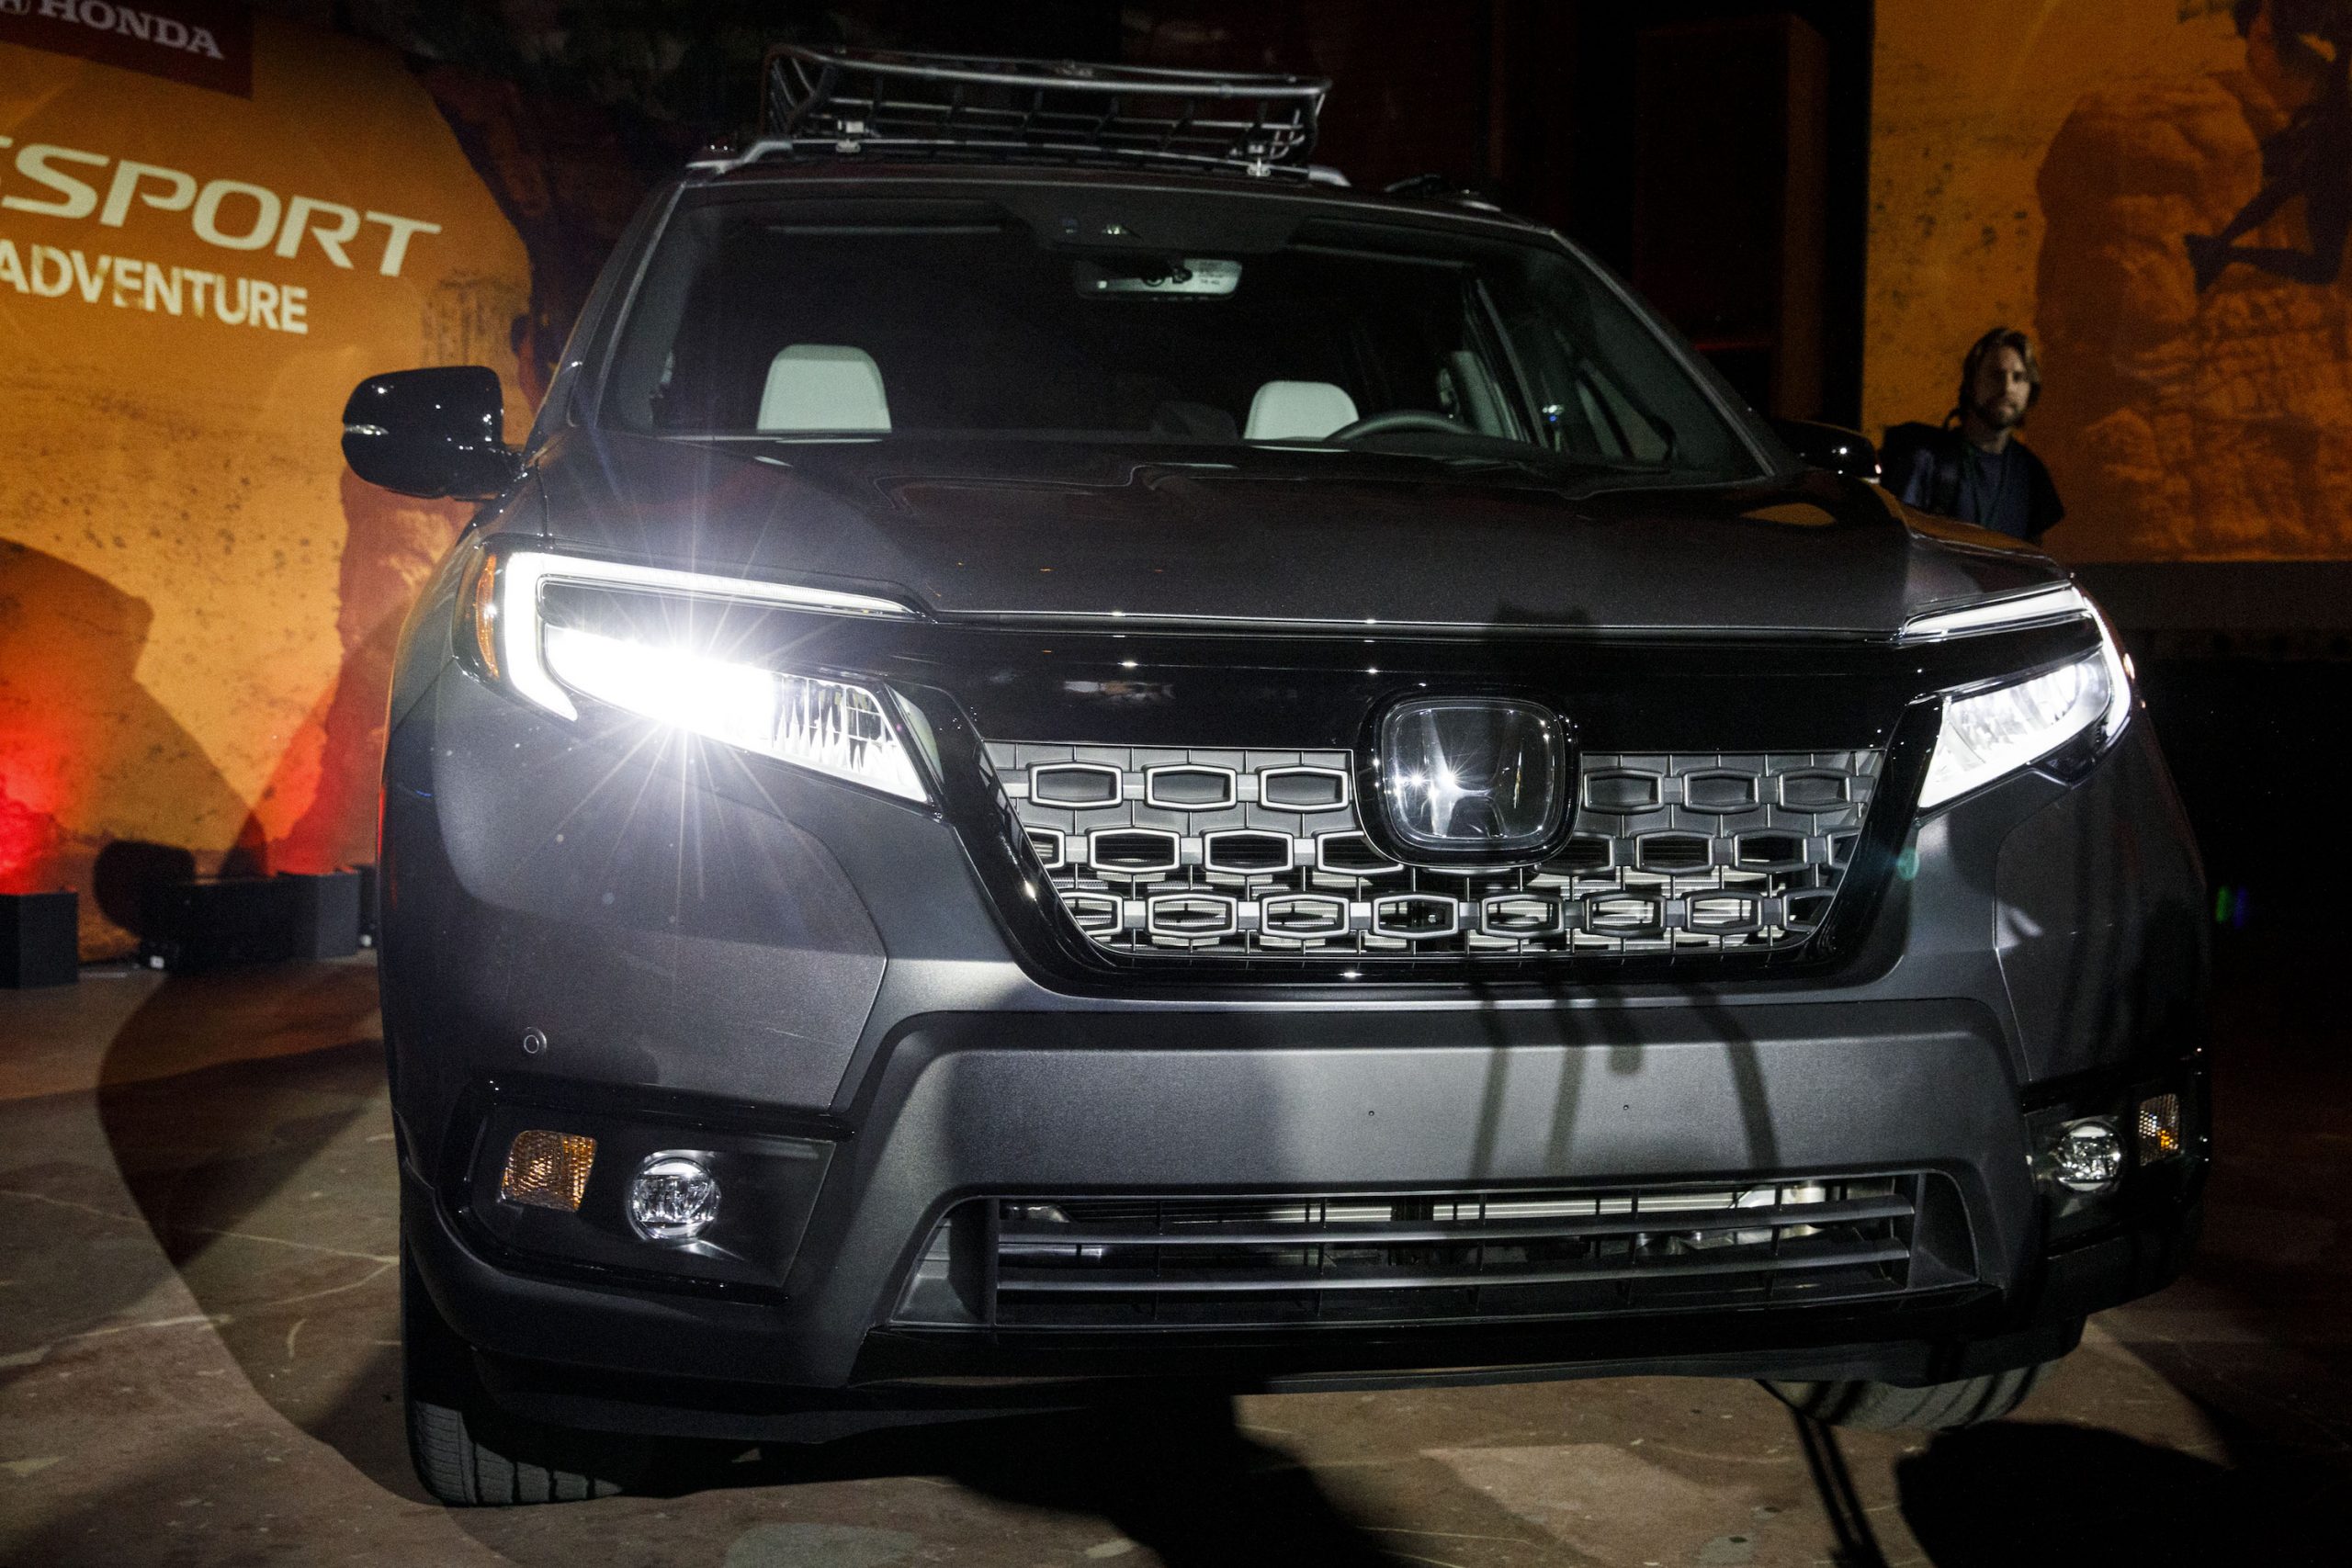 A black Honda Motor Co. Passport sport utility vehicle (SUV) sits on display during a reveal event